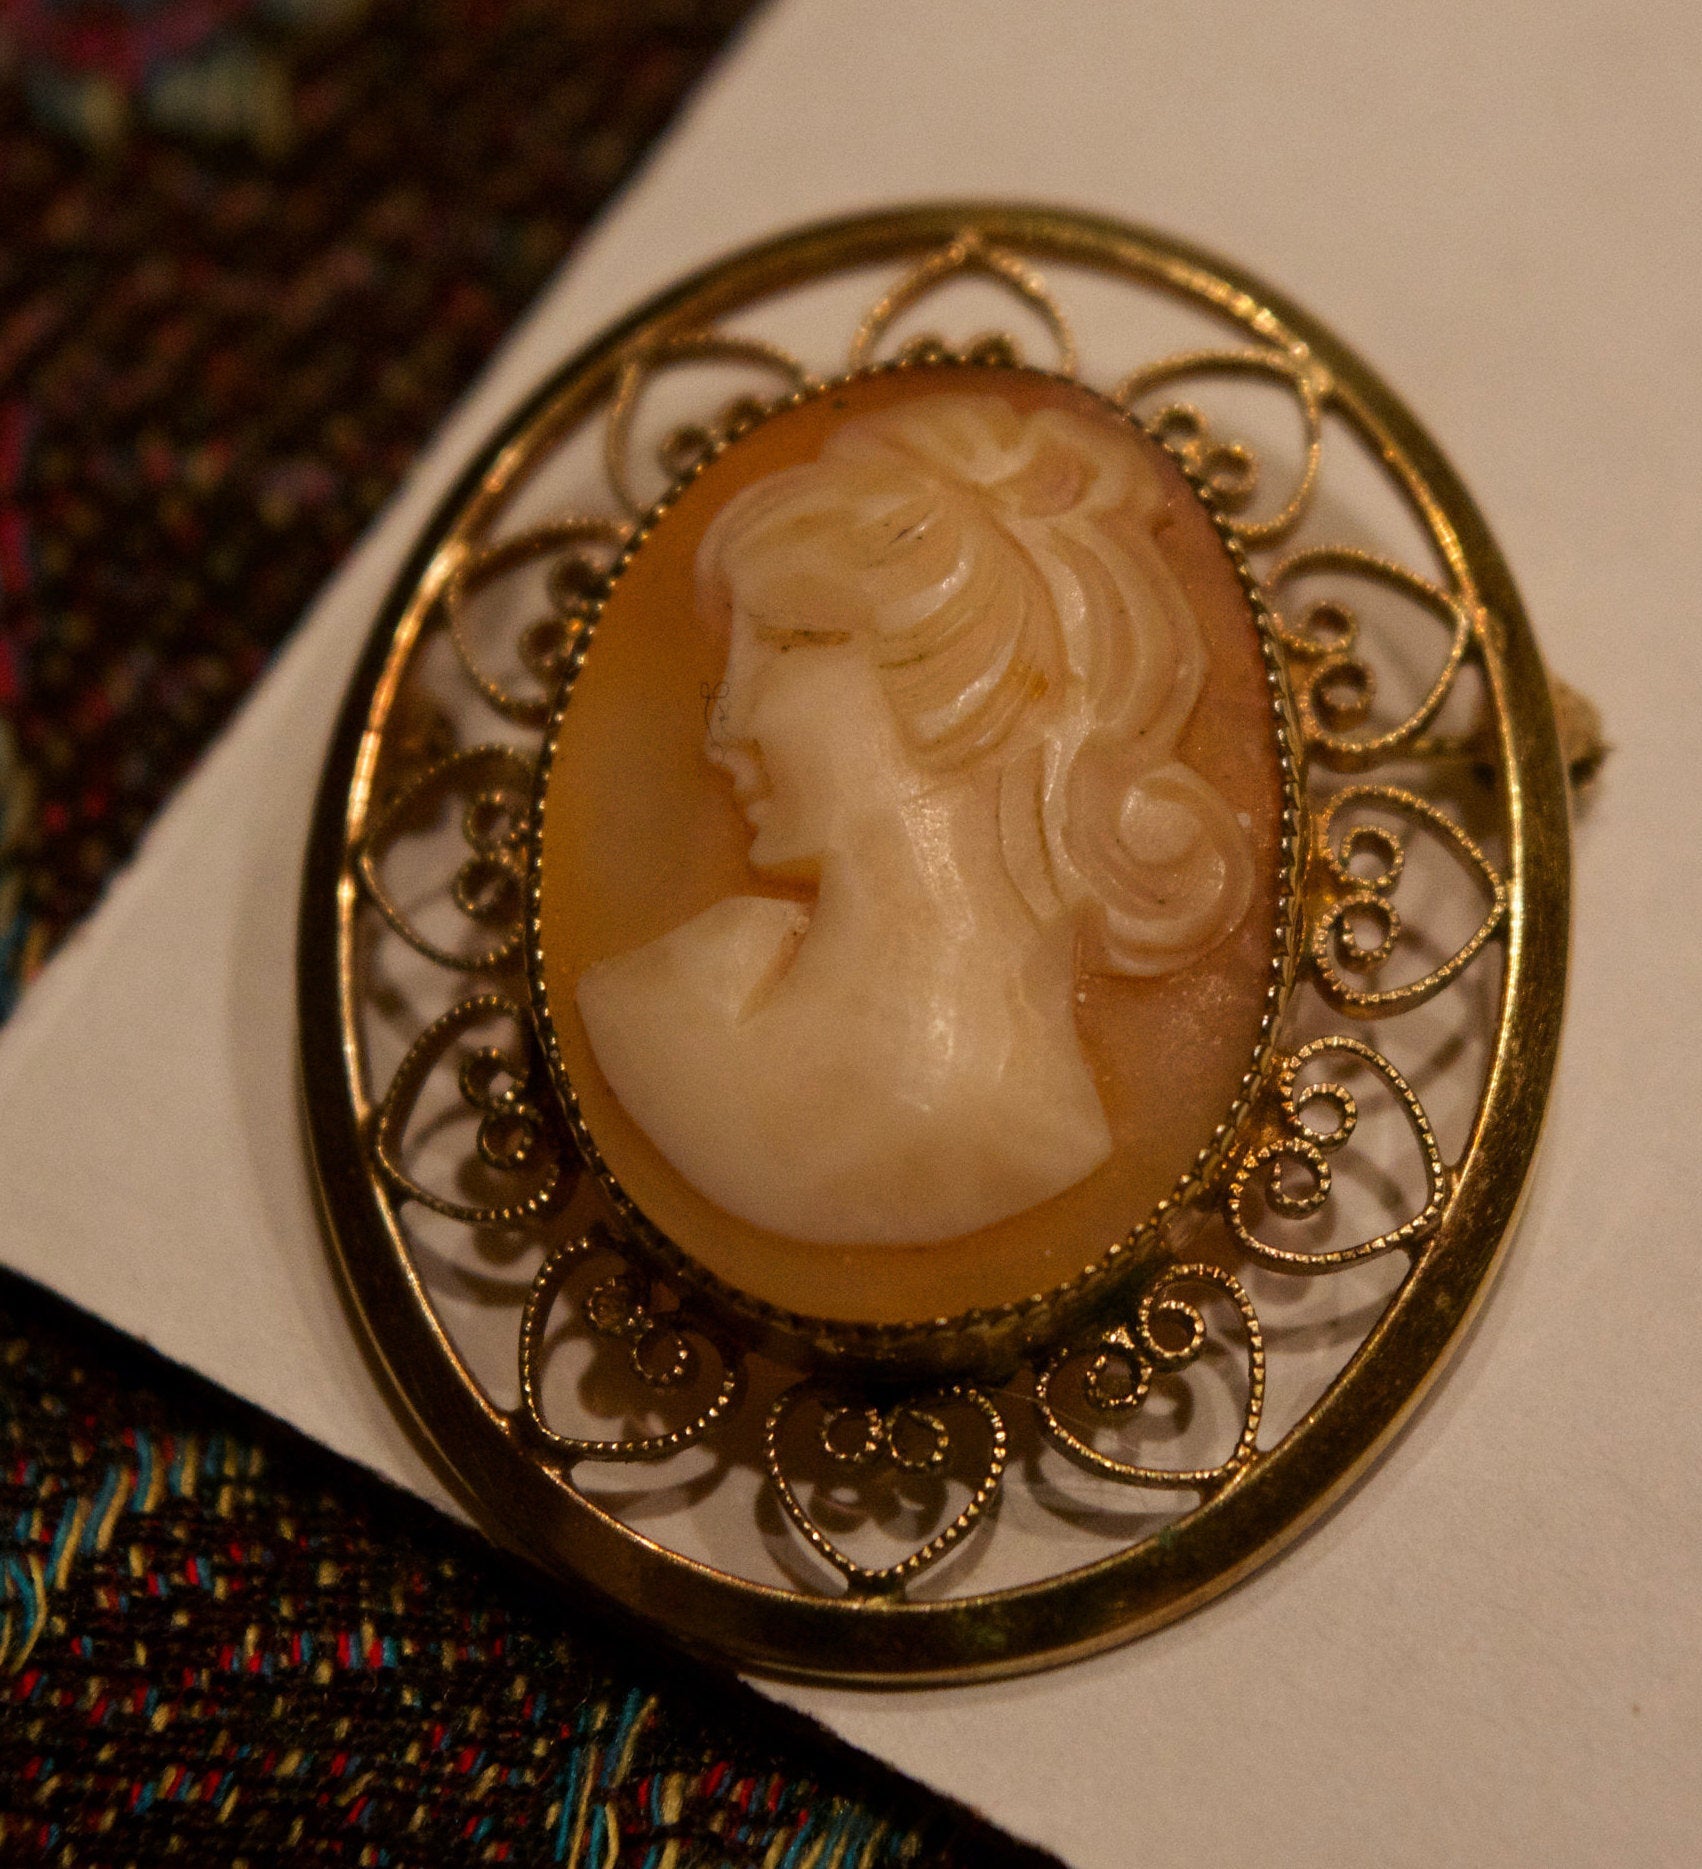 Catamore - 12k Gold Filled Filligree Shell Cameo Brooch